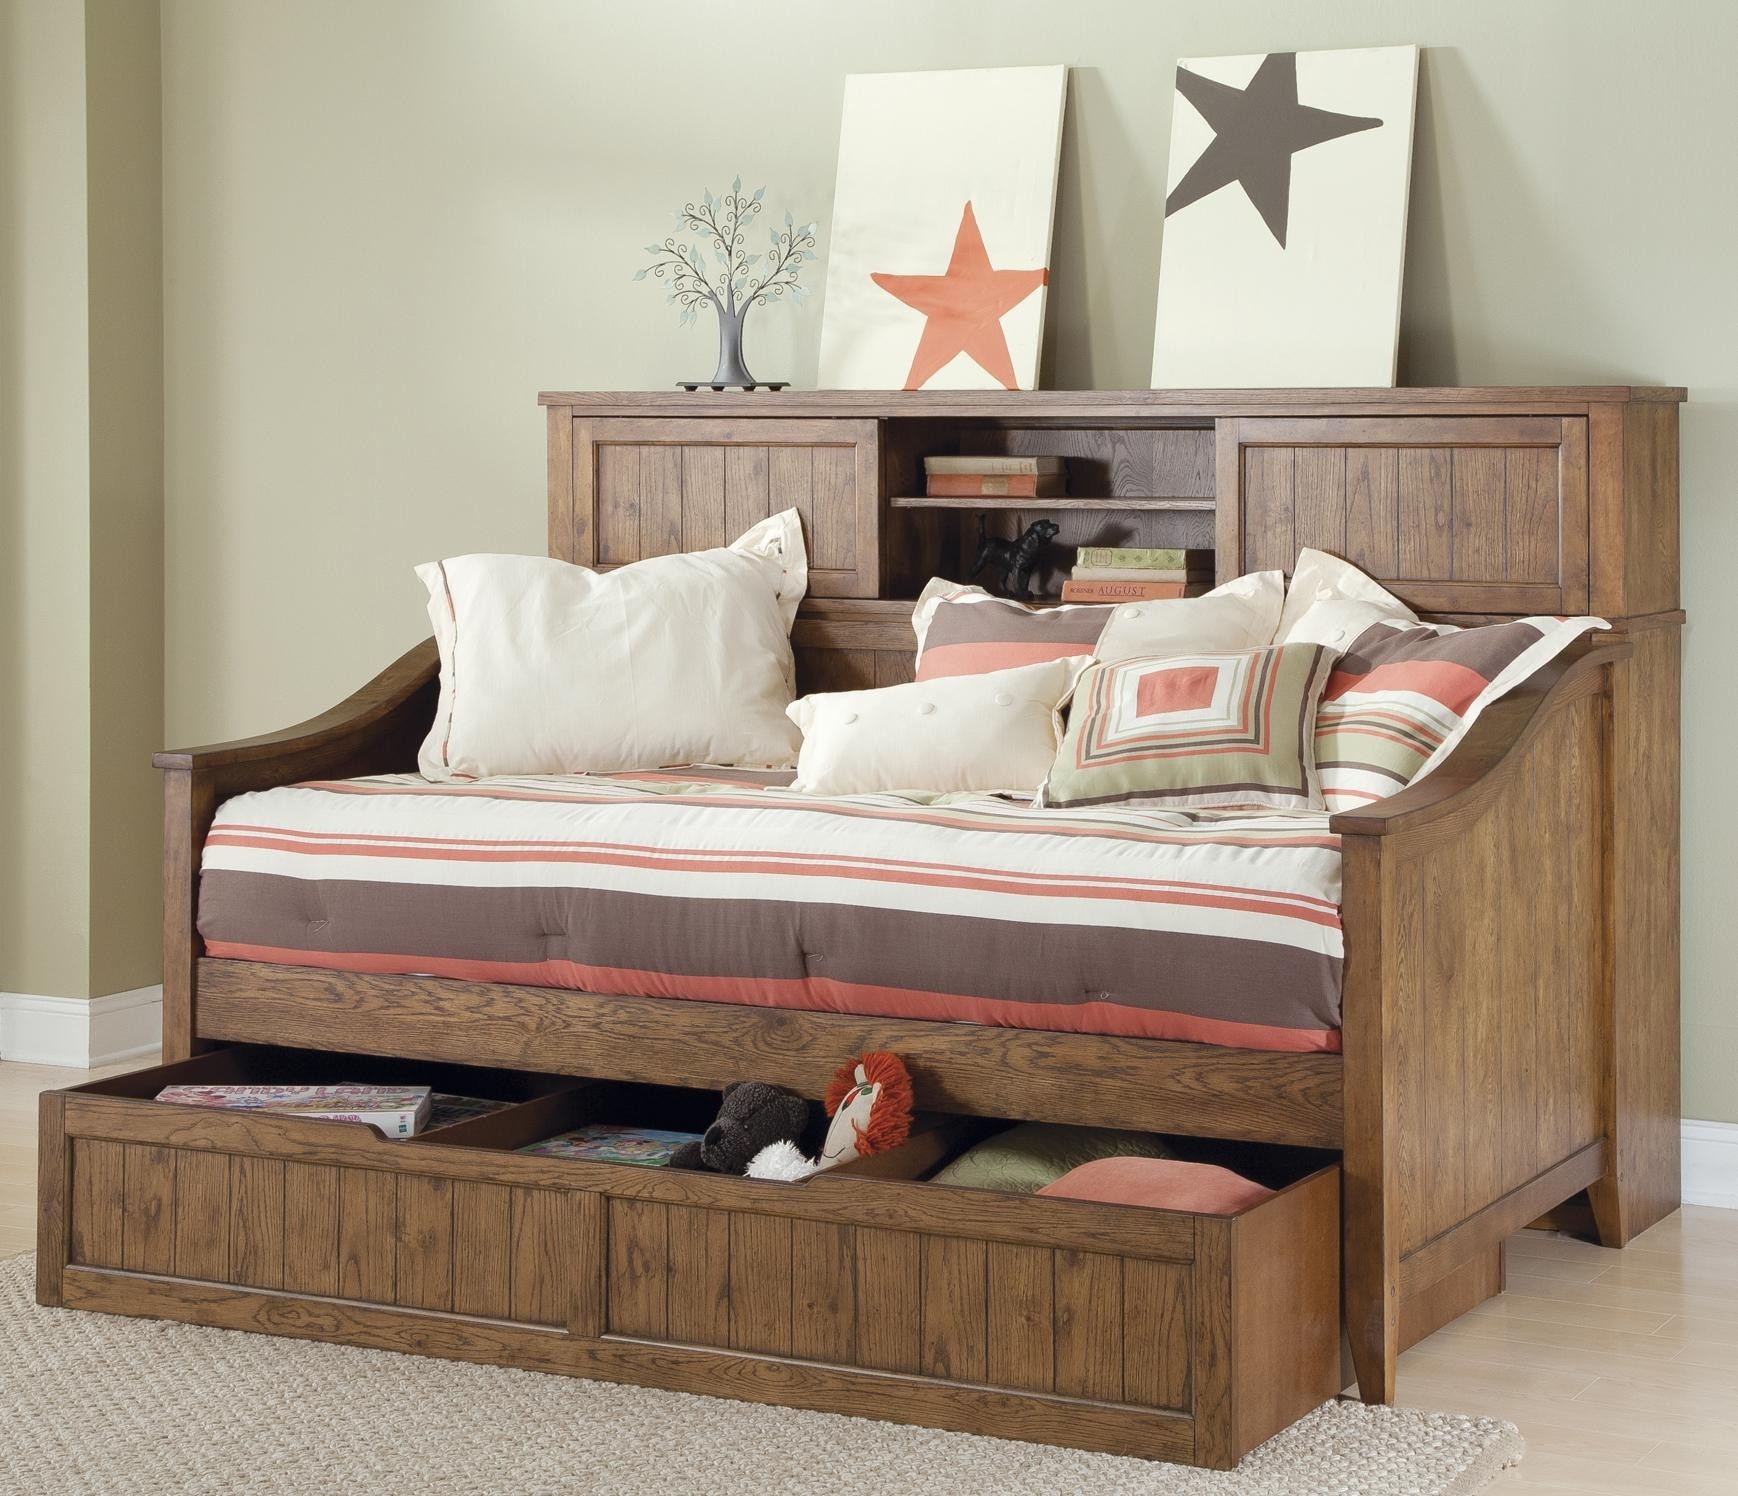 Full day bed and trundle unit with removable storage dividers